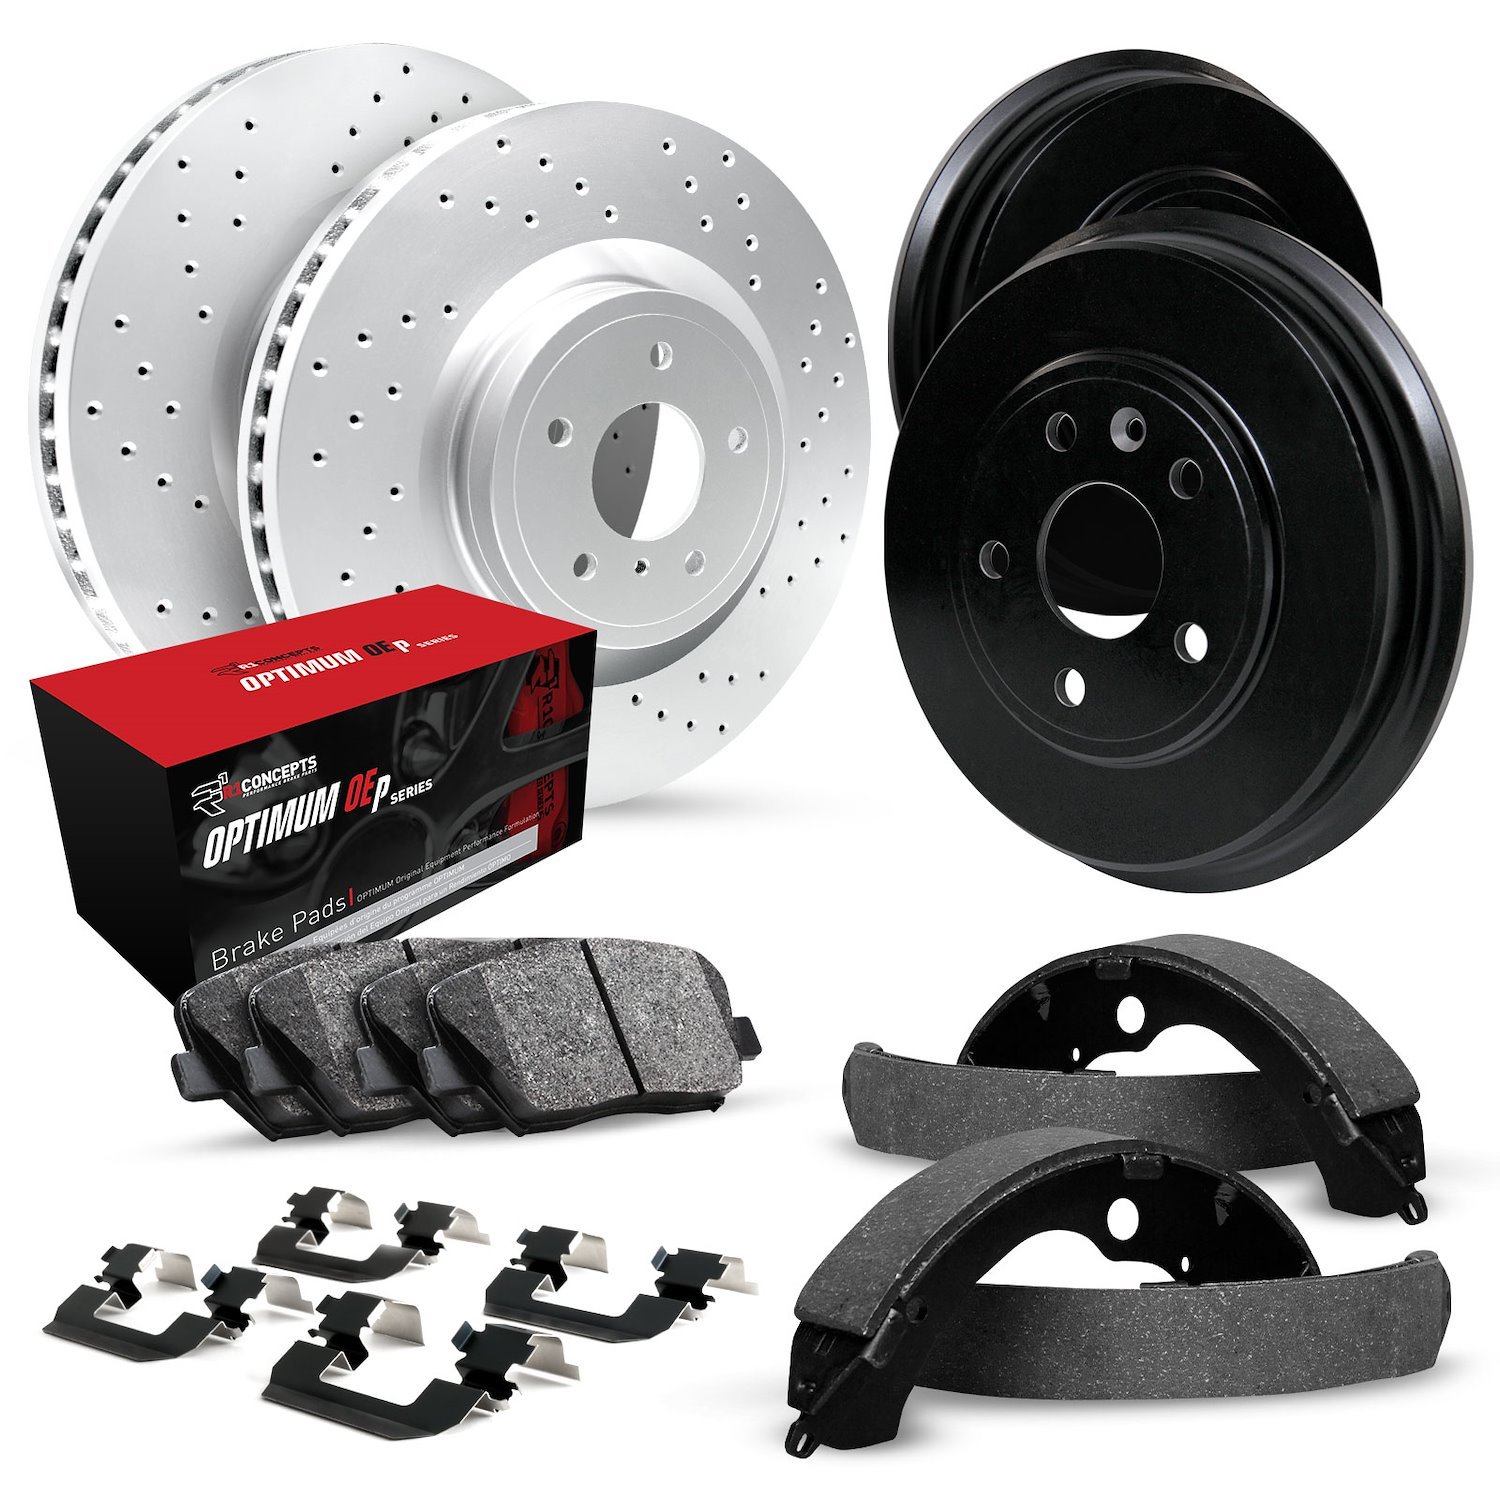 GEO-Carbon Drilled Brake Rotor & Drum Set w/Optimum OE Pads, Shoes, & Hardware, 1990-1995 GM, Position: Front & Rear